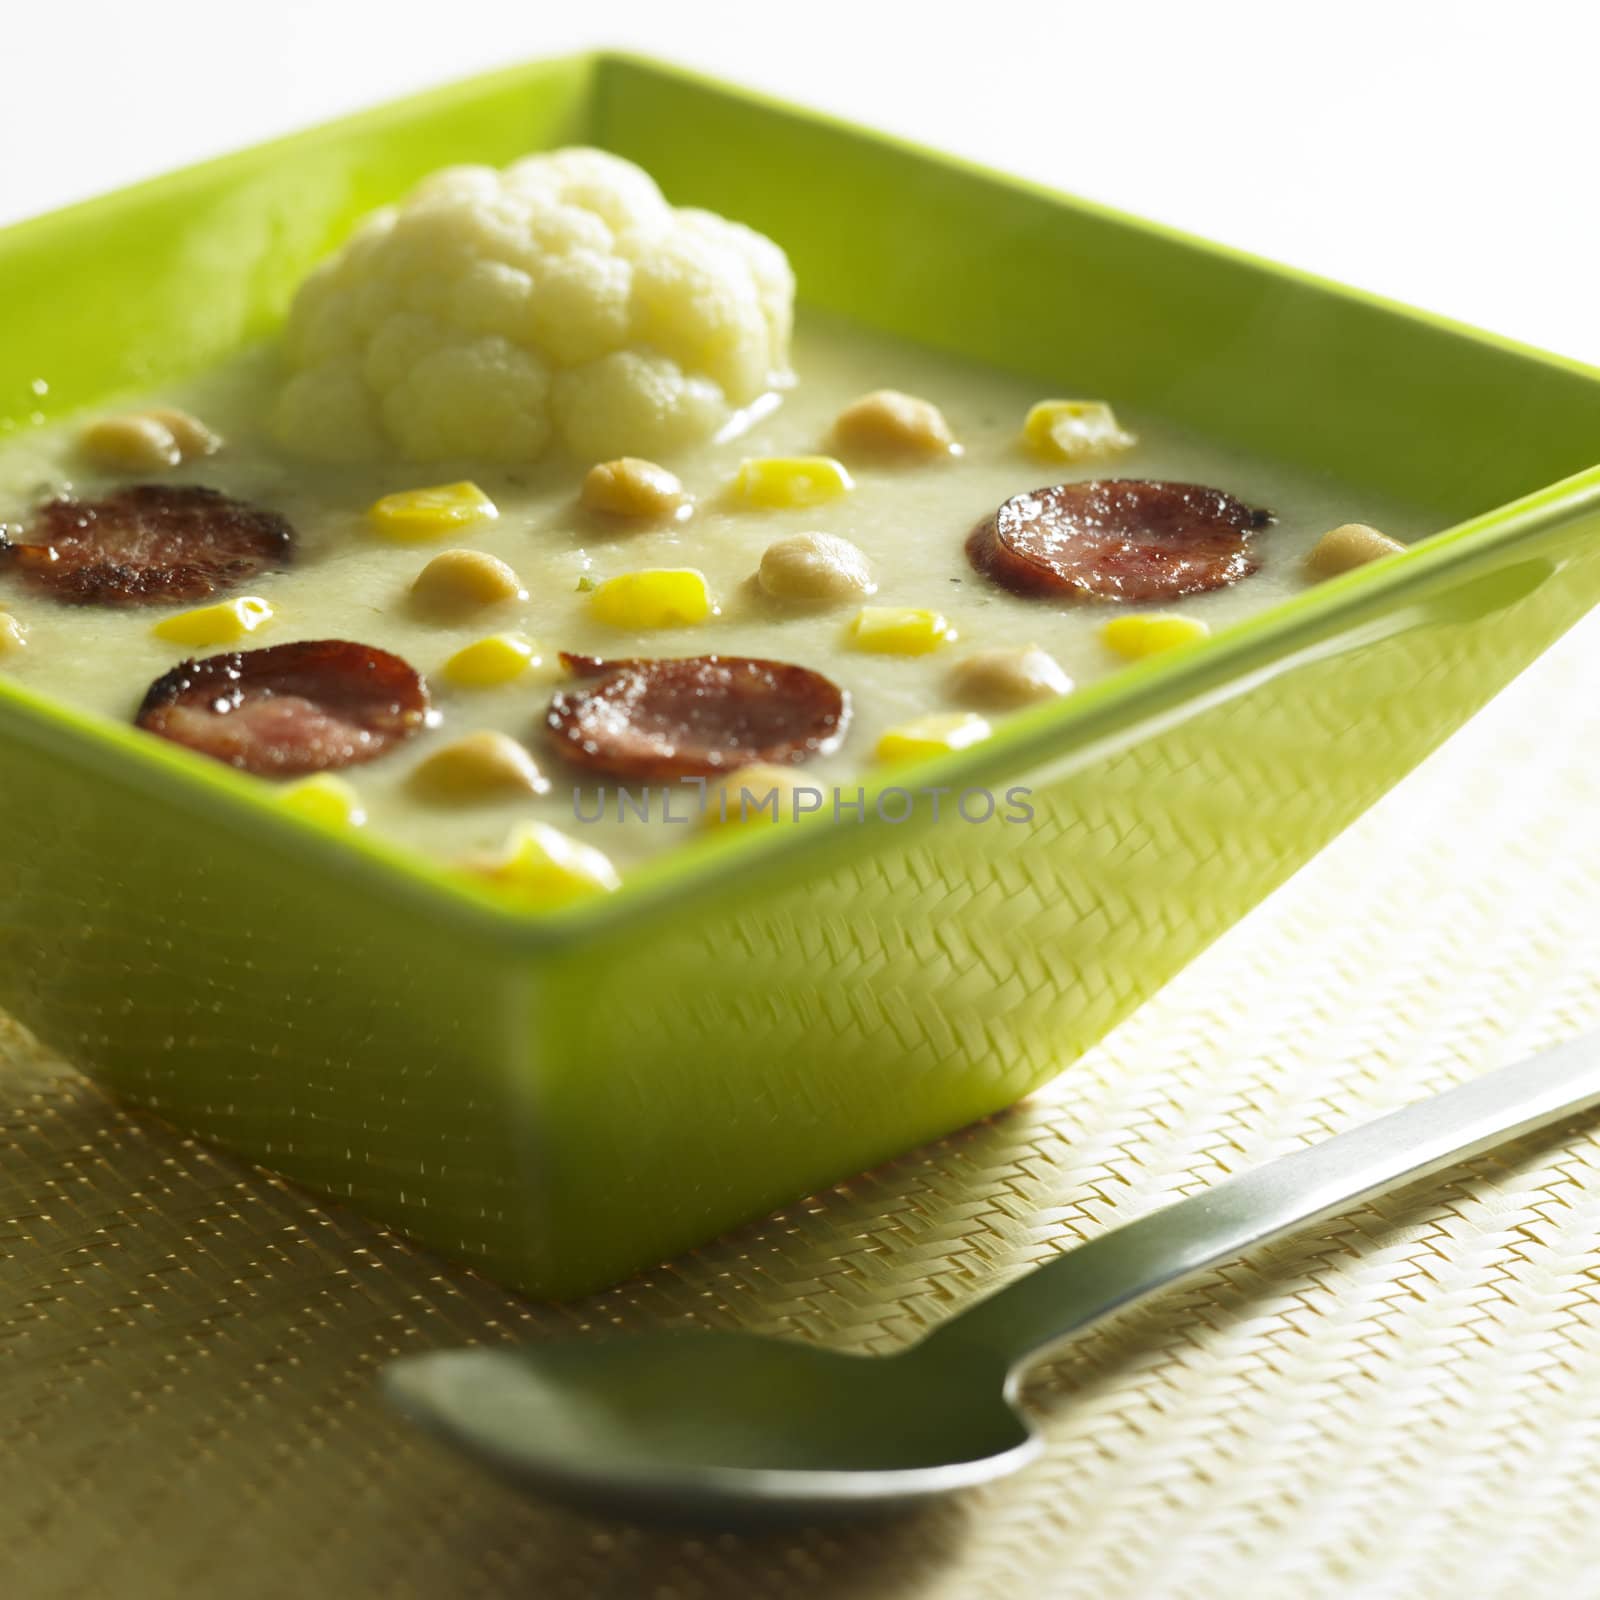 mixed cauliflower soup with sausage by phbcz